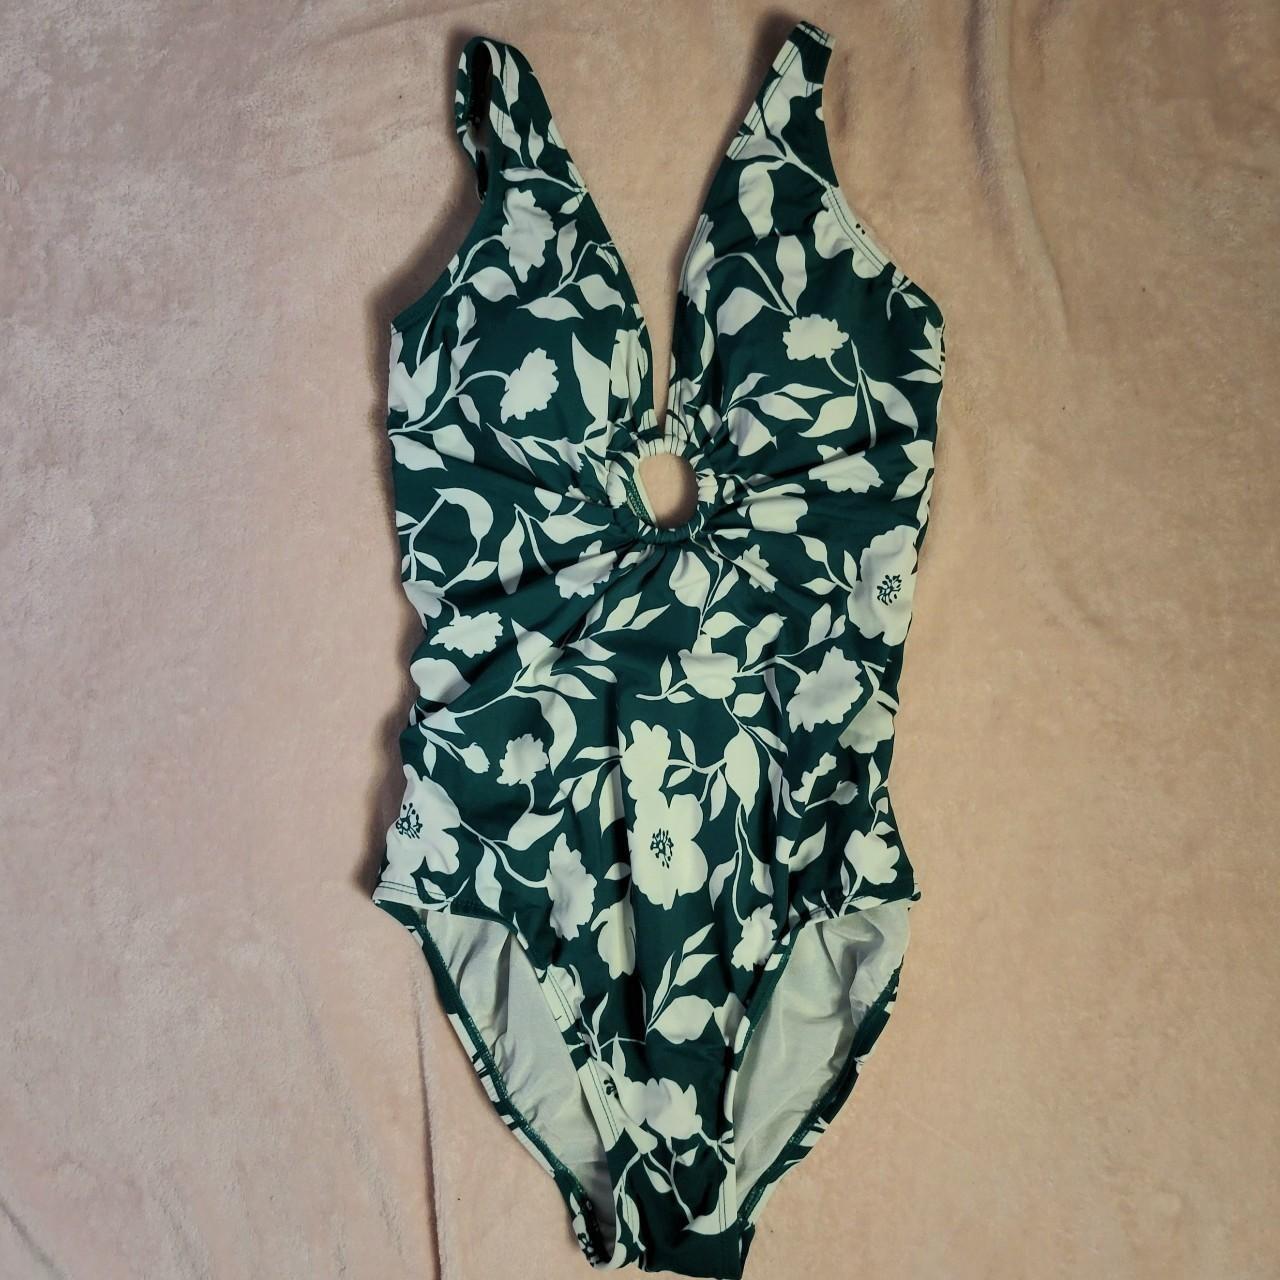 Product Image 2 - LISTING FOR TWO SWIMSUITS 

1